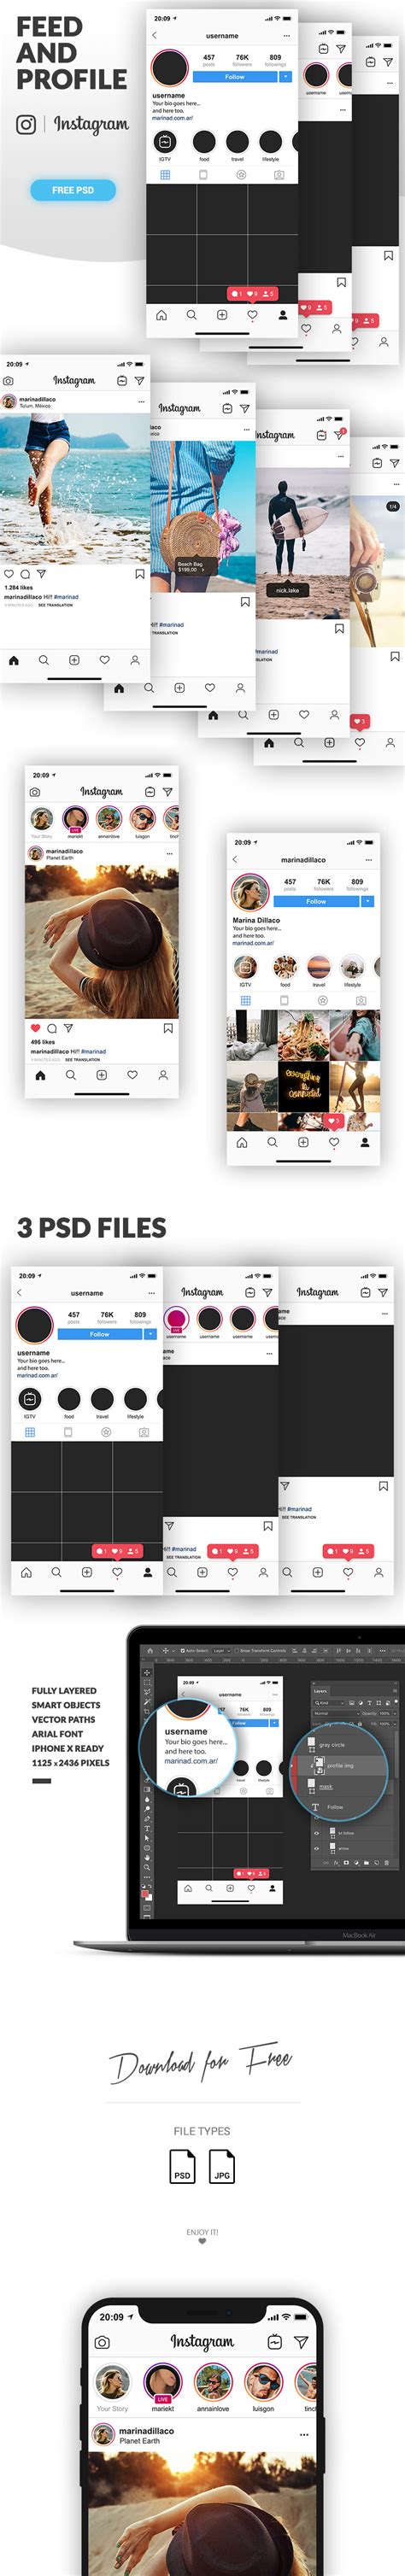 Free Instagram Feed And Profile Psd Ui Iphonex Ready Behance